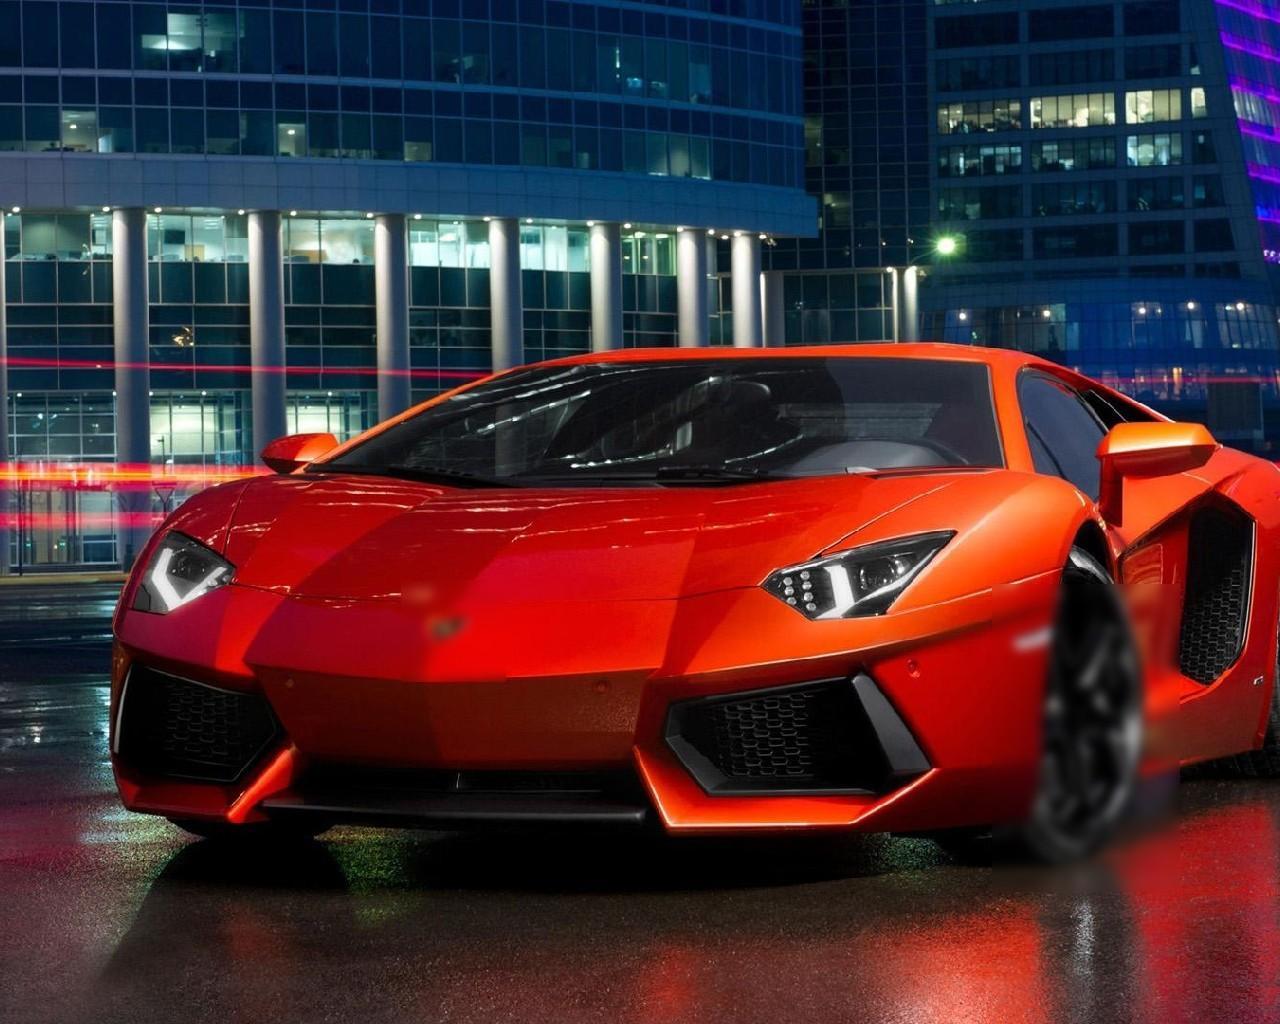 New HD Wallpapers Lamborghini Cars 2017 for Android - APK ...